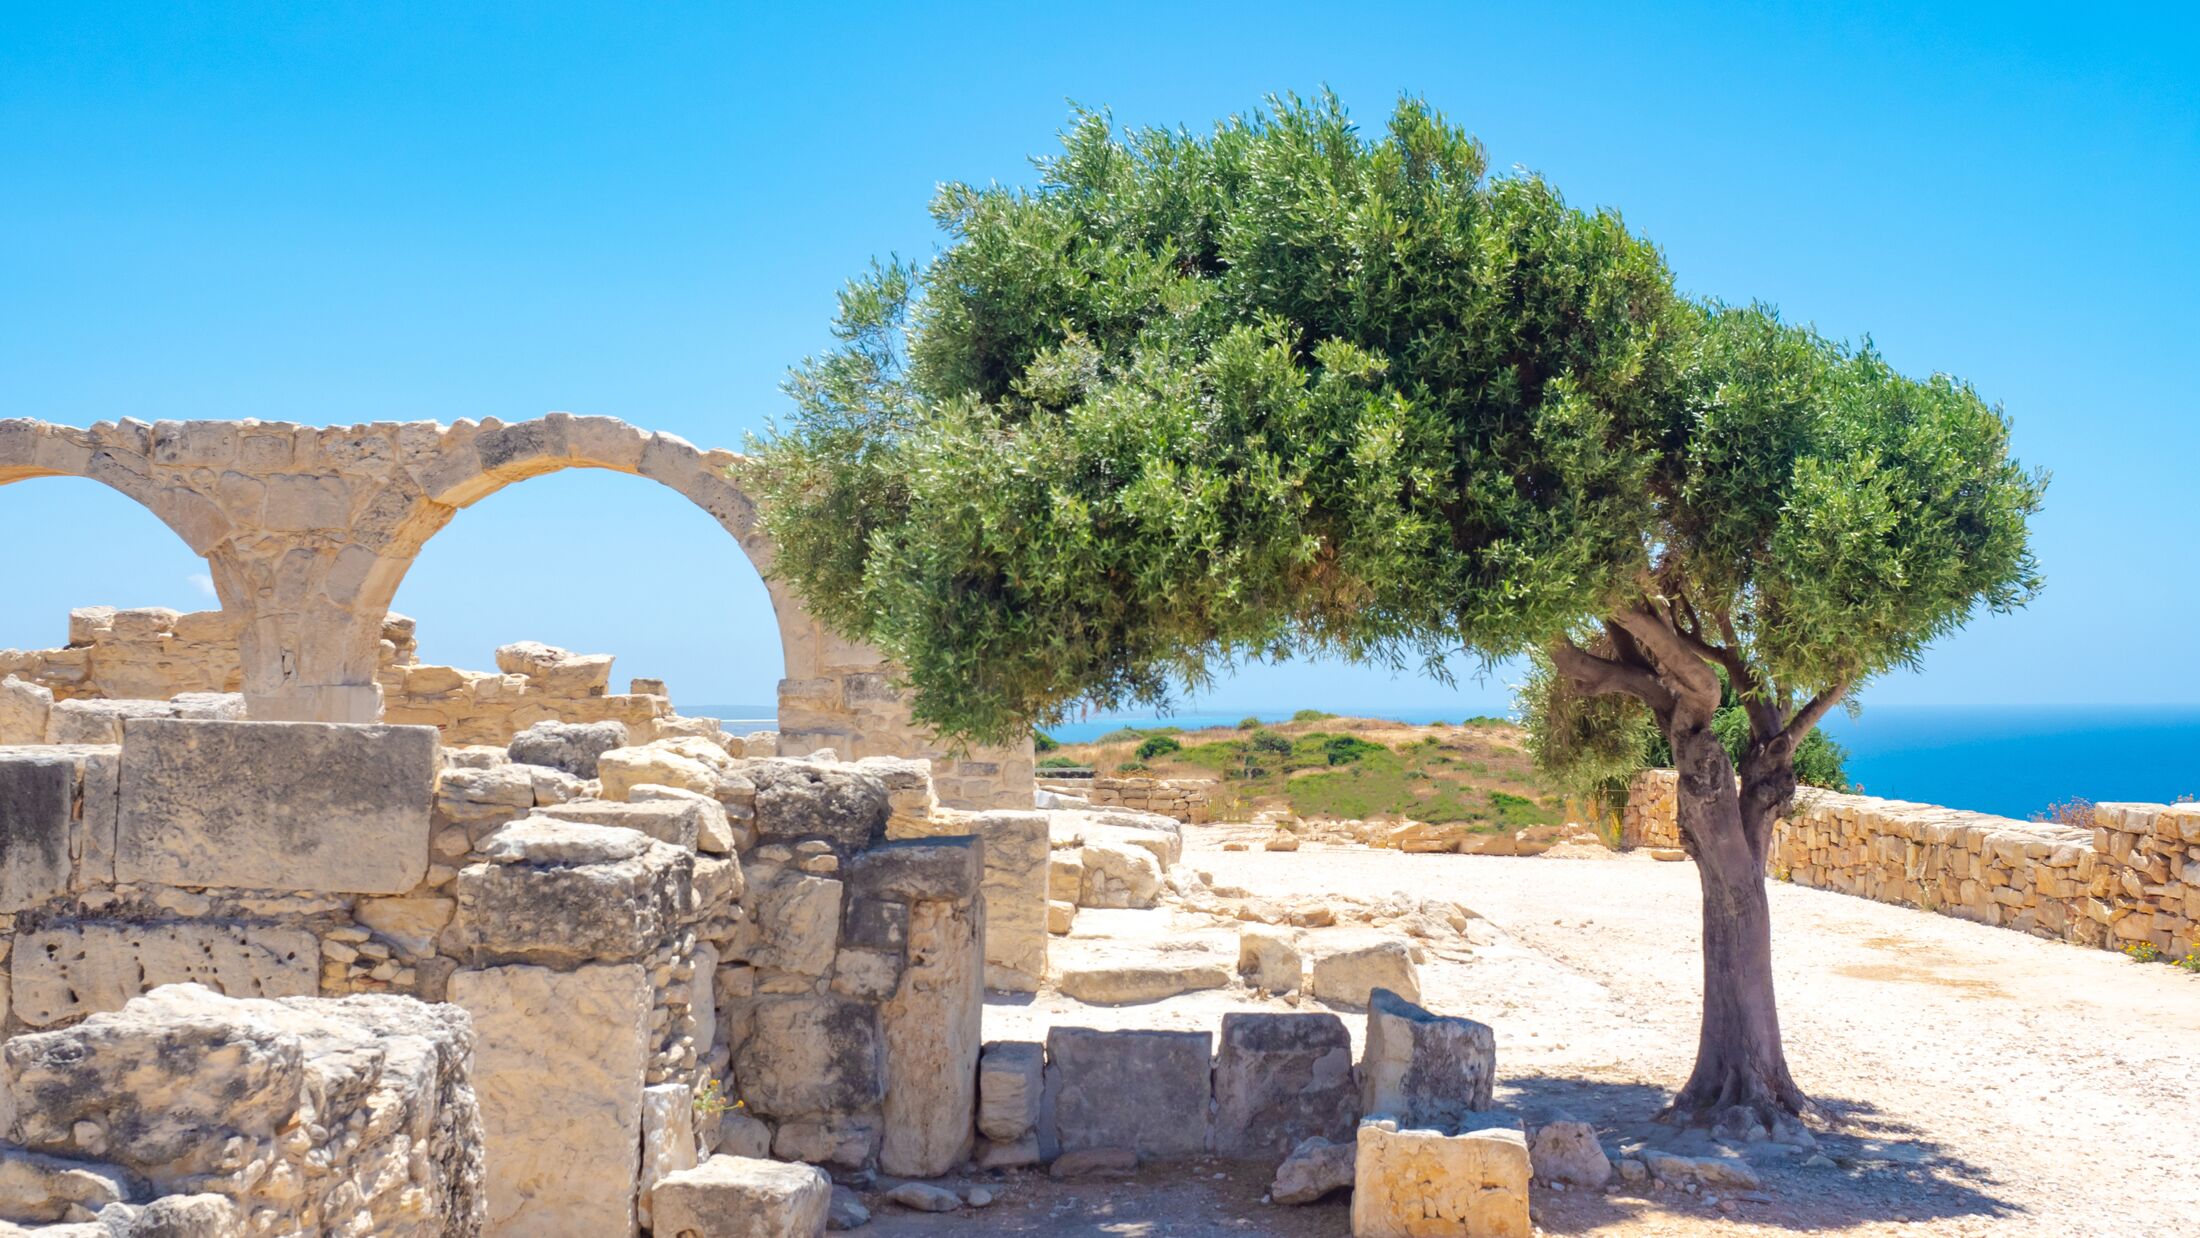 Cyprus. Pathos. Archaeological Park of Paphos. Excavations under the open sky. Museum Ruins on the background of blue sky. Byzantine ruins. Panorama of Cyprus. Travels in Paphos. Tree near the ruins